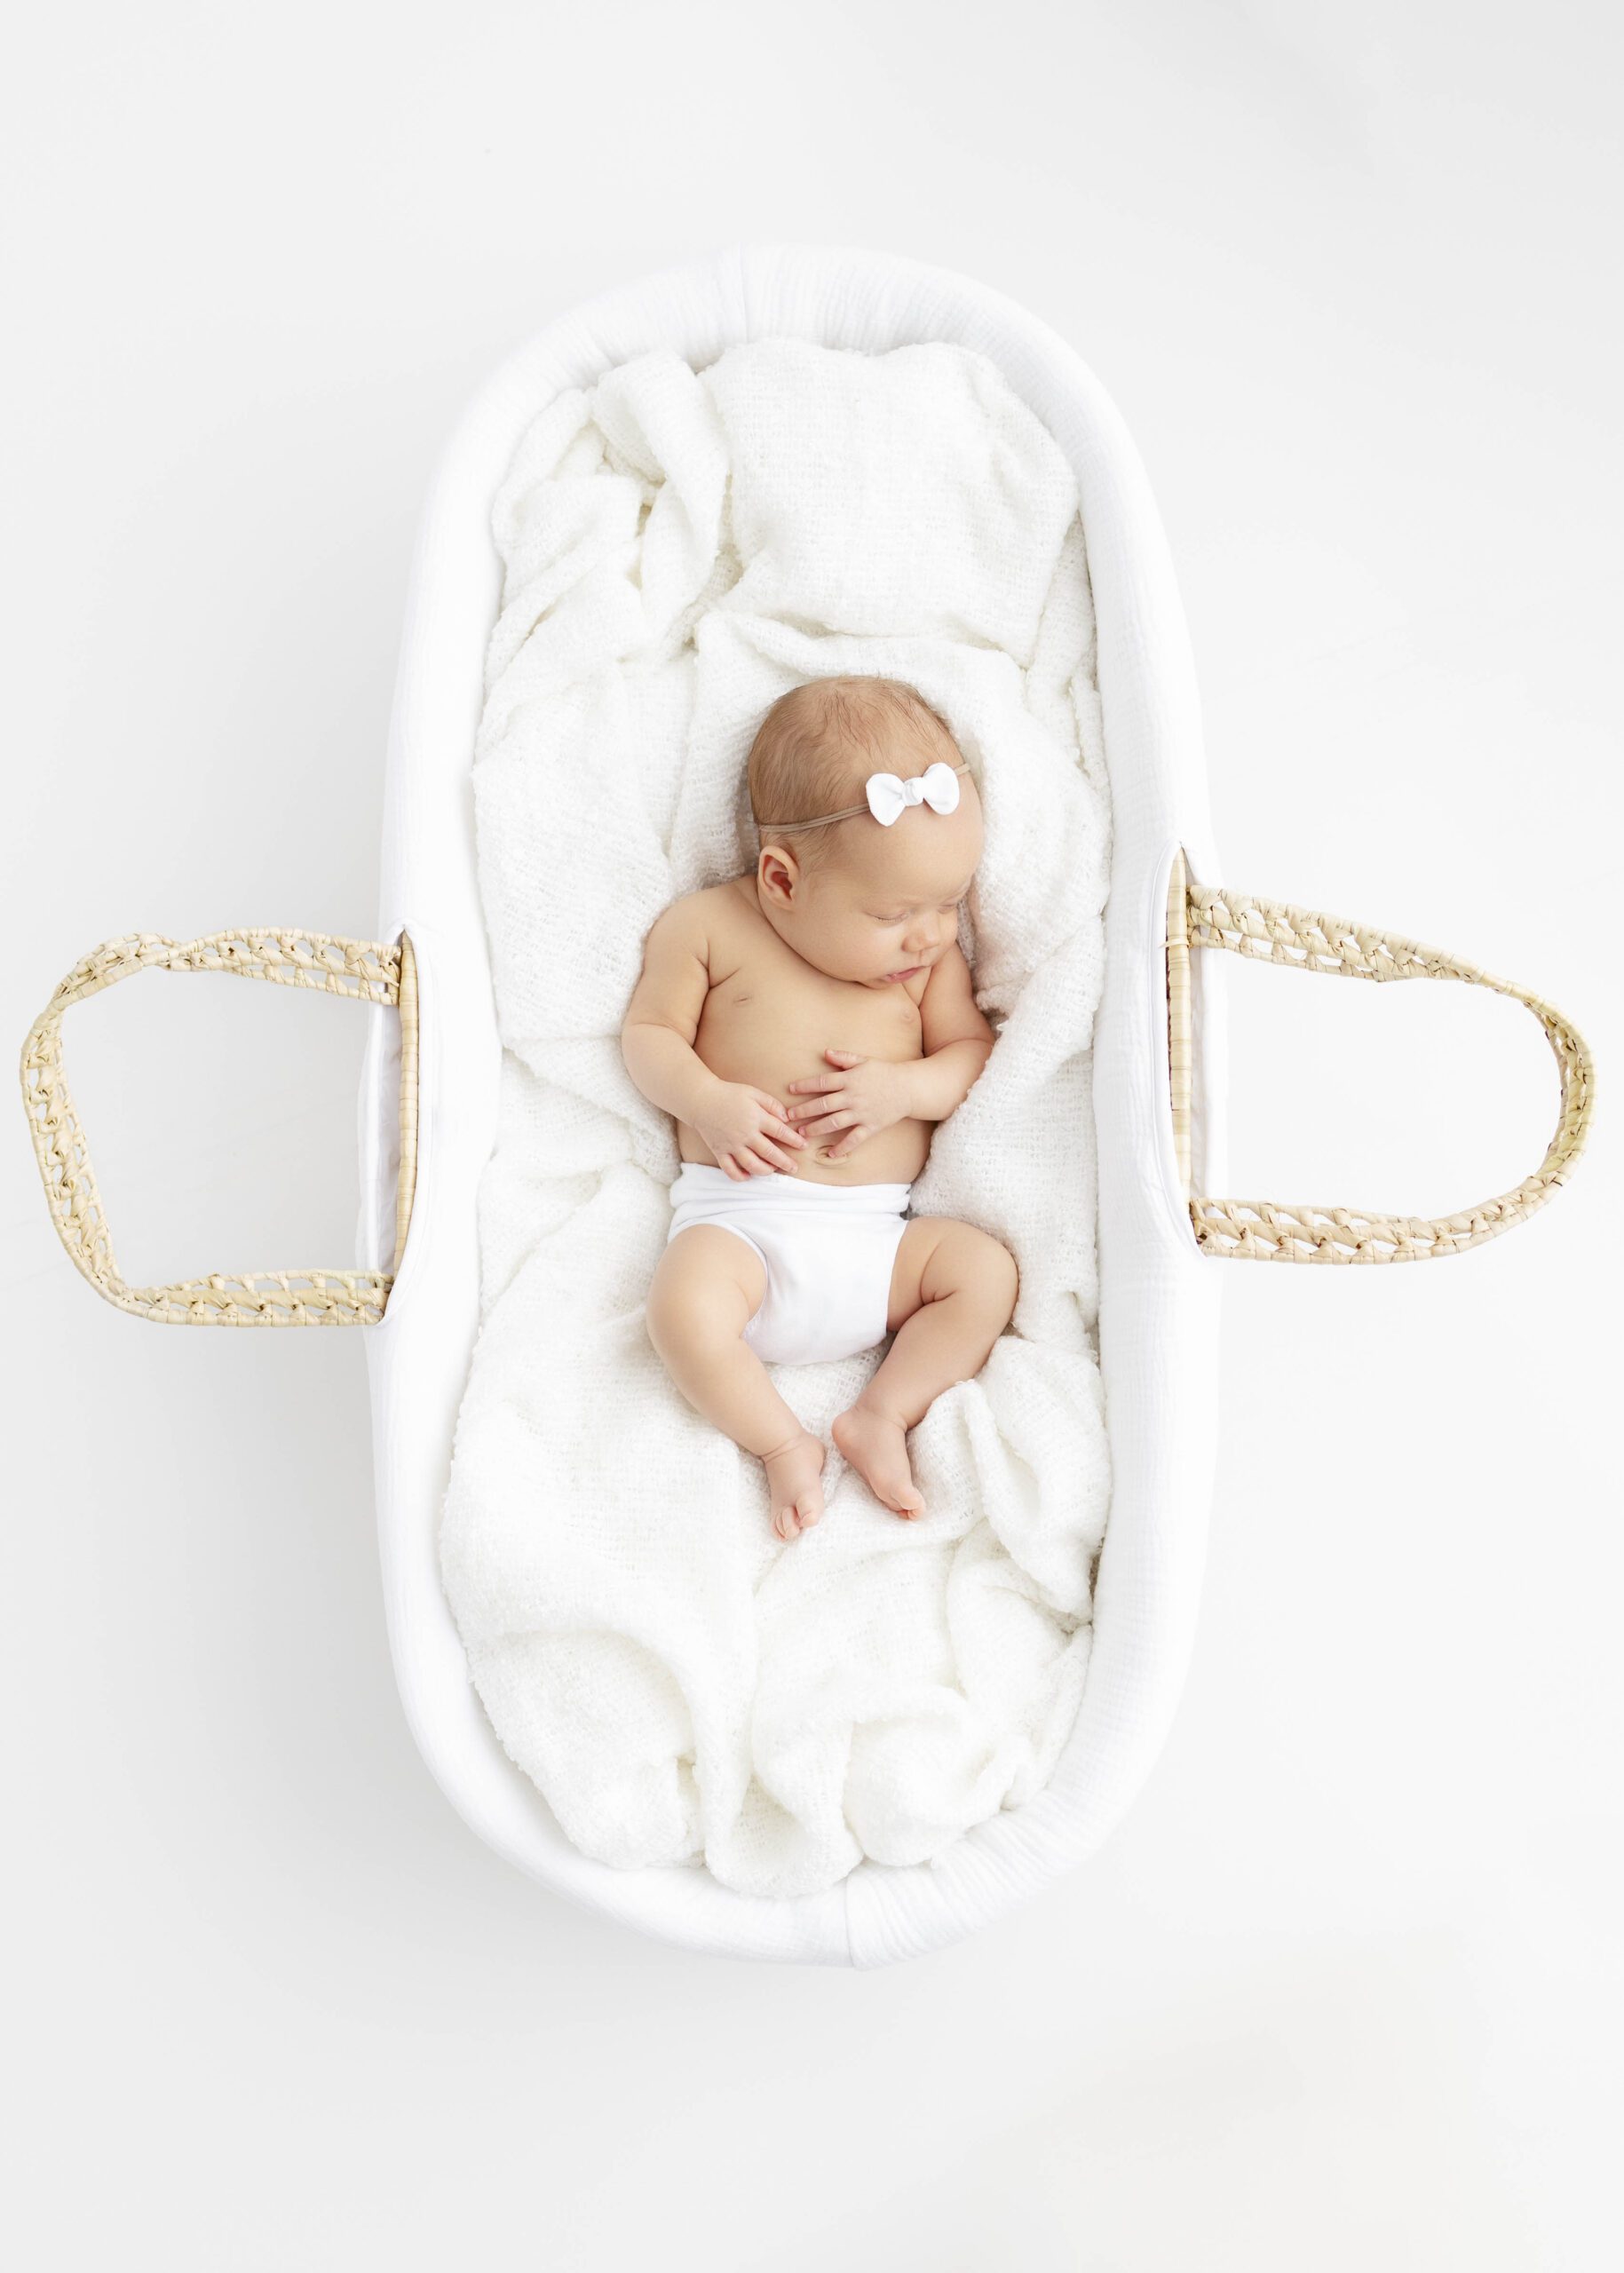 newborn baby in moses basket surrounded by white blankets for best time newborn photos